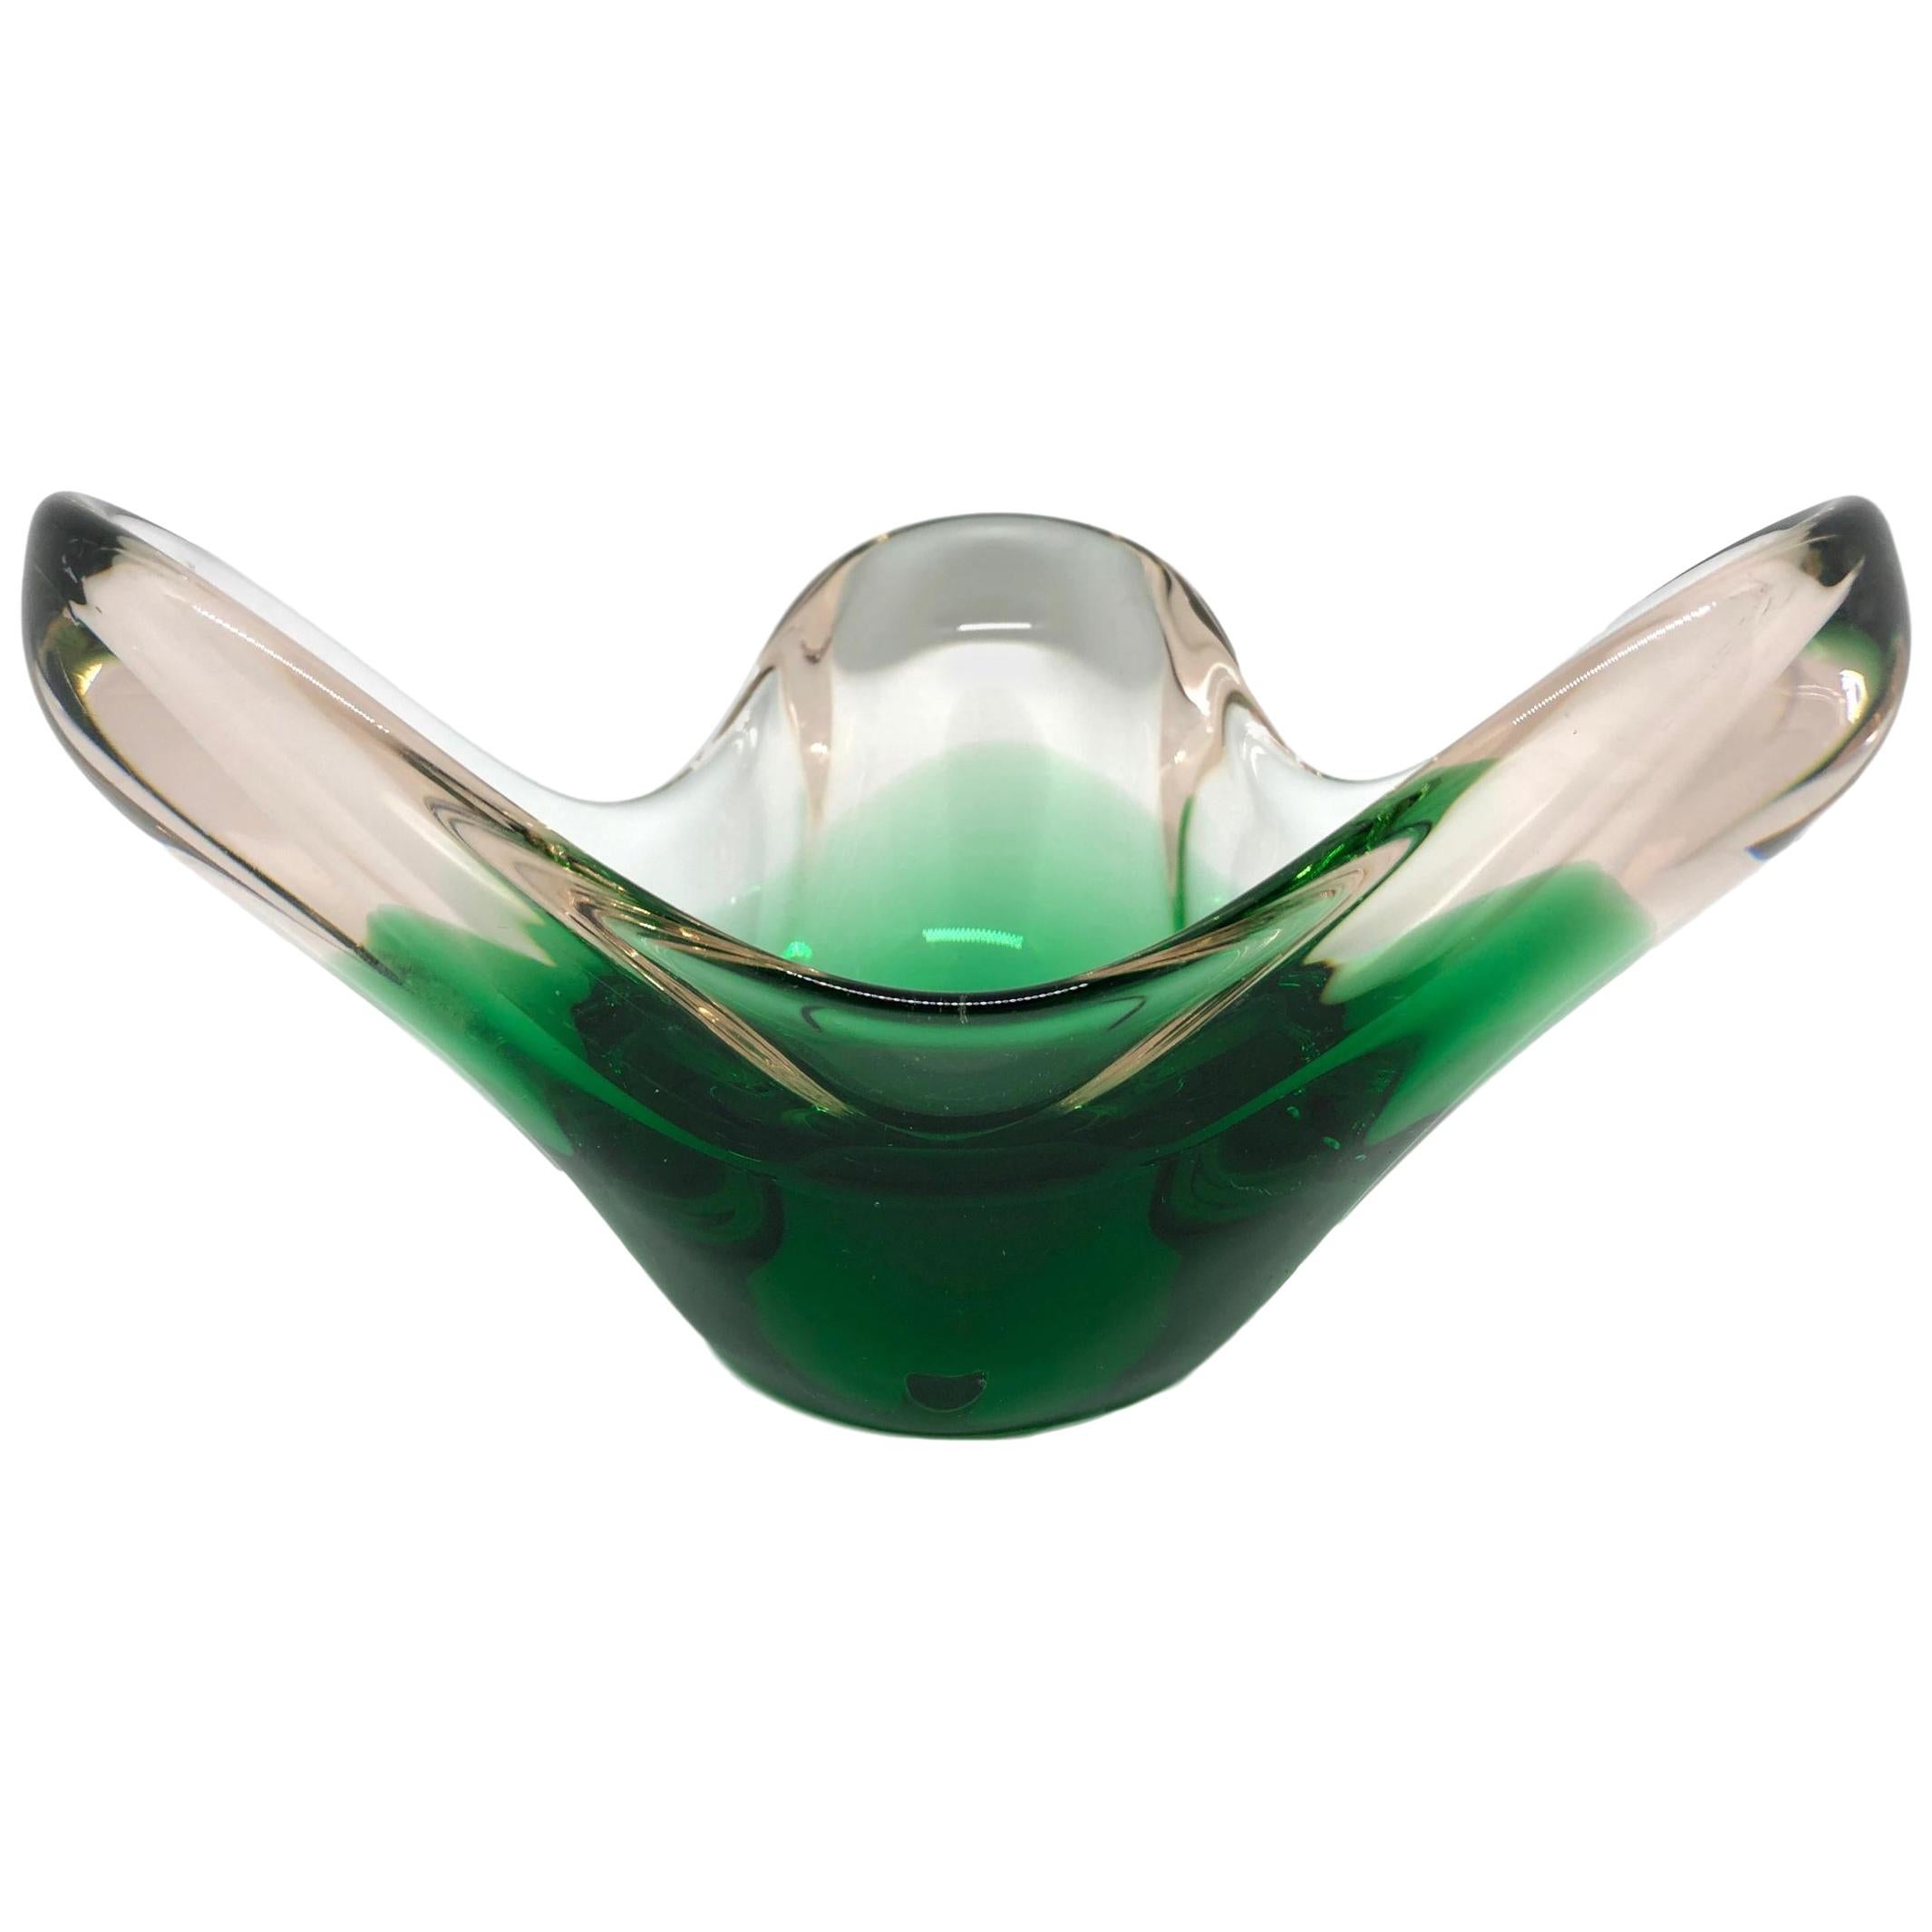 Murano Art Glass Green and Clear Bowl Catchall Italy, Sommerso, 1960s